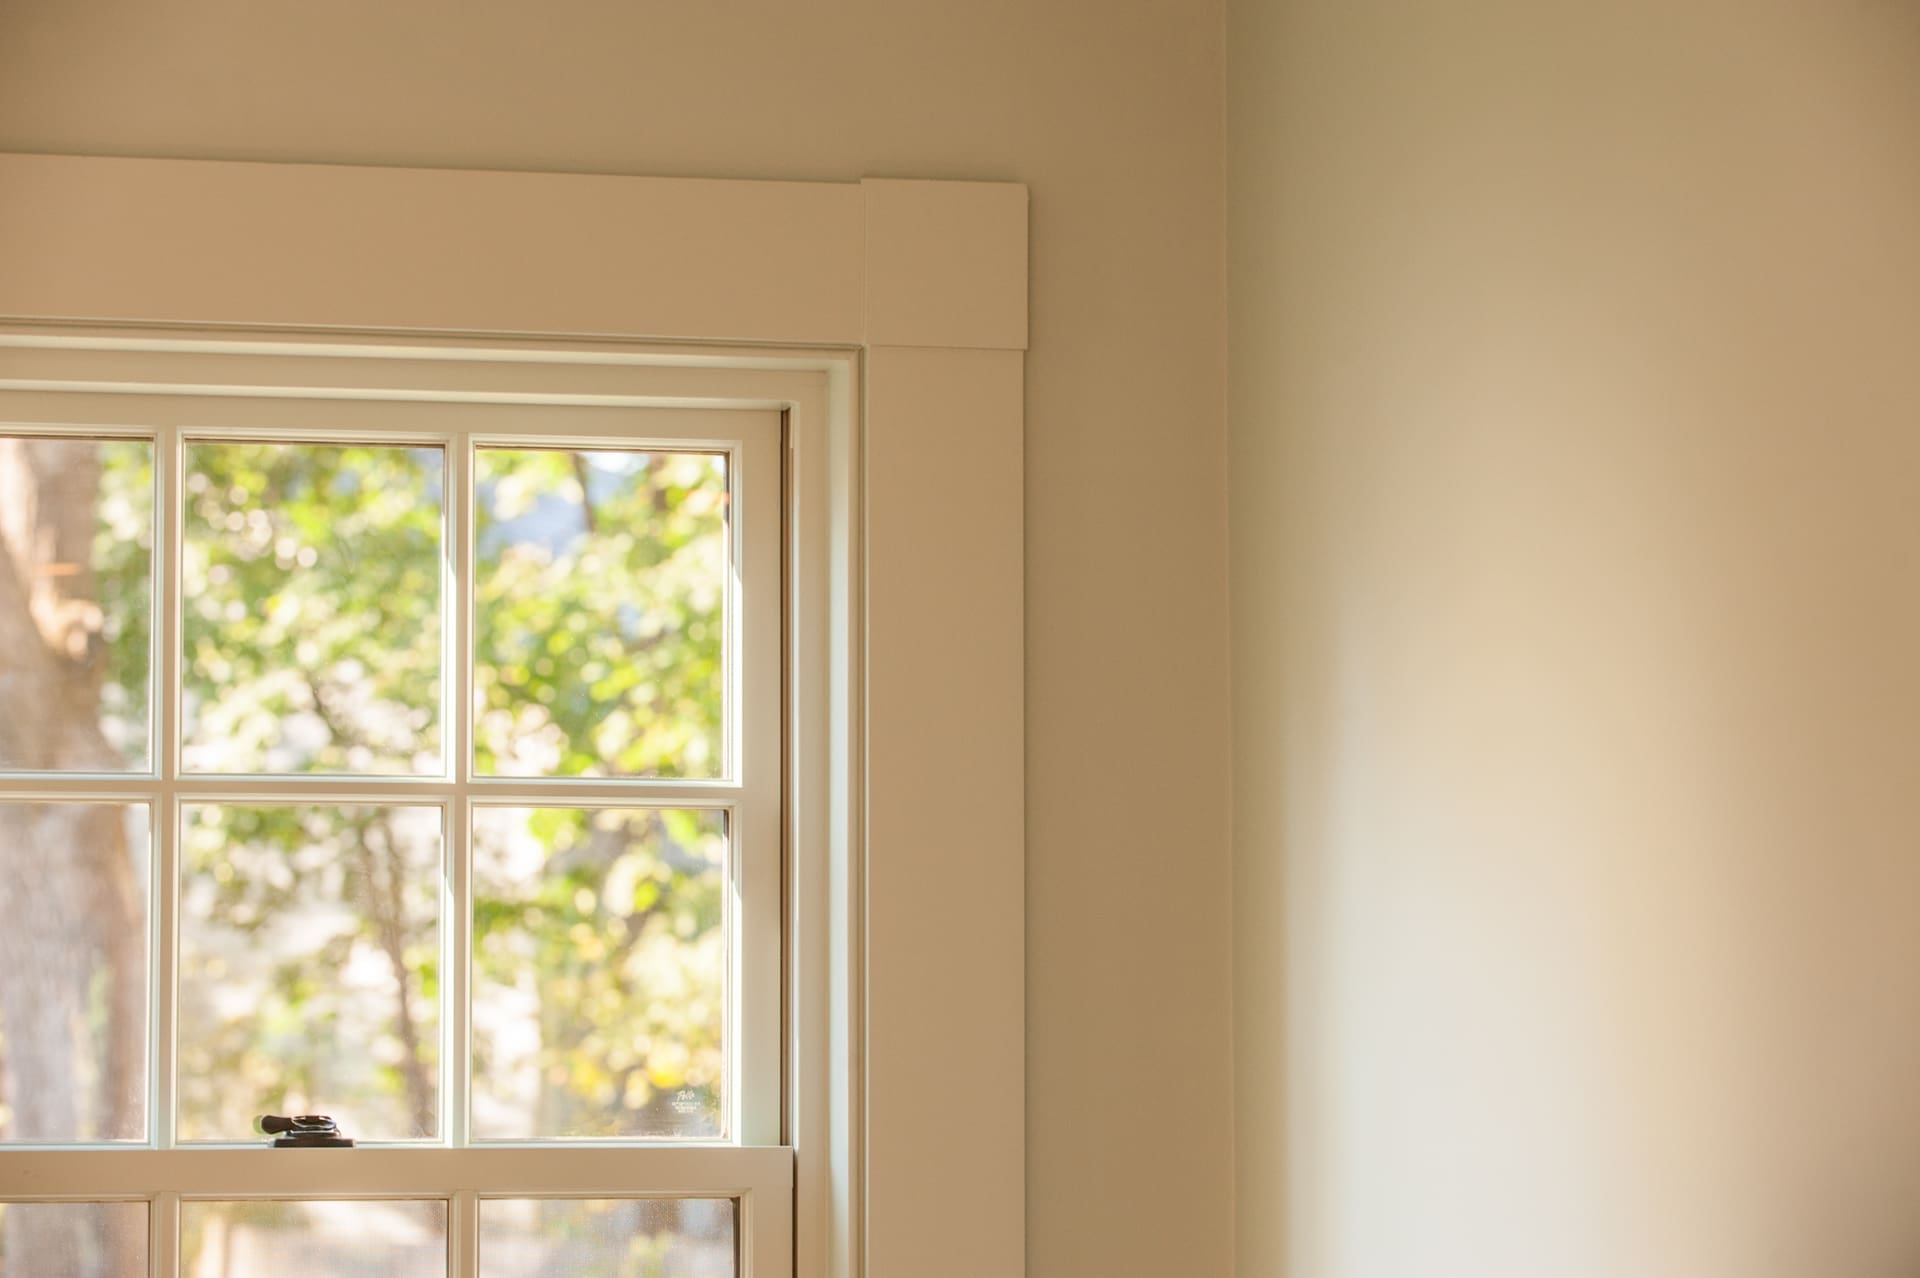 A photo of a white colonial style window and trim from the inside of a house.